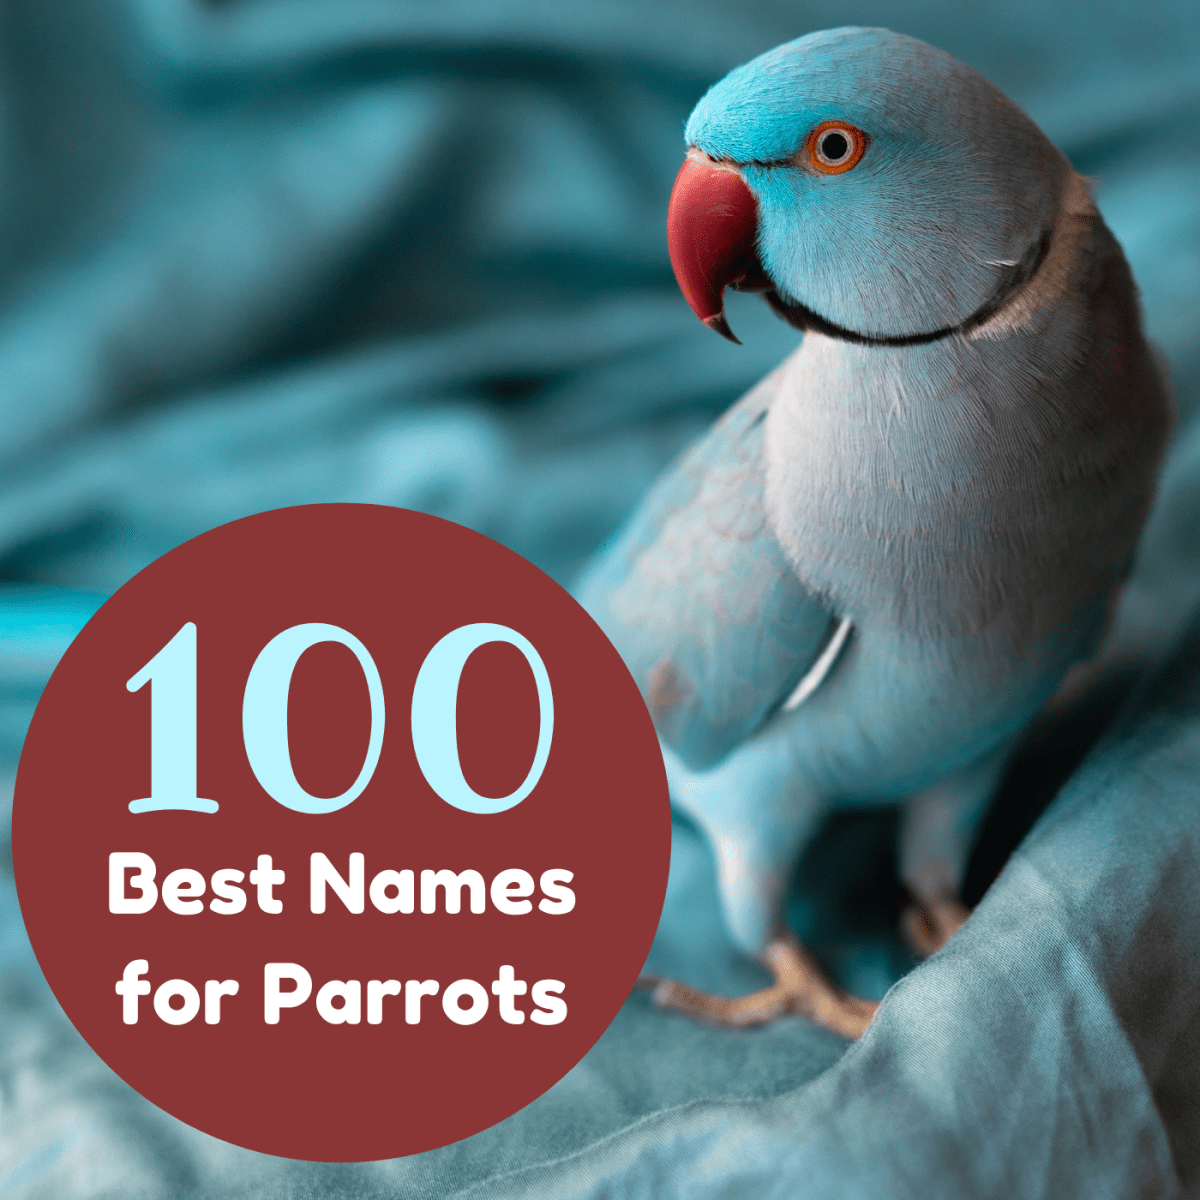 Kostbar marxistisk følelsesmæssig What Are Good Parrot Names? 100 Name Ideas for Macaws and More - PetHelpful